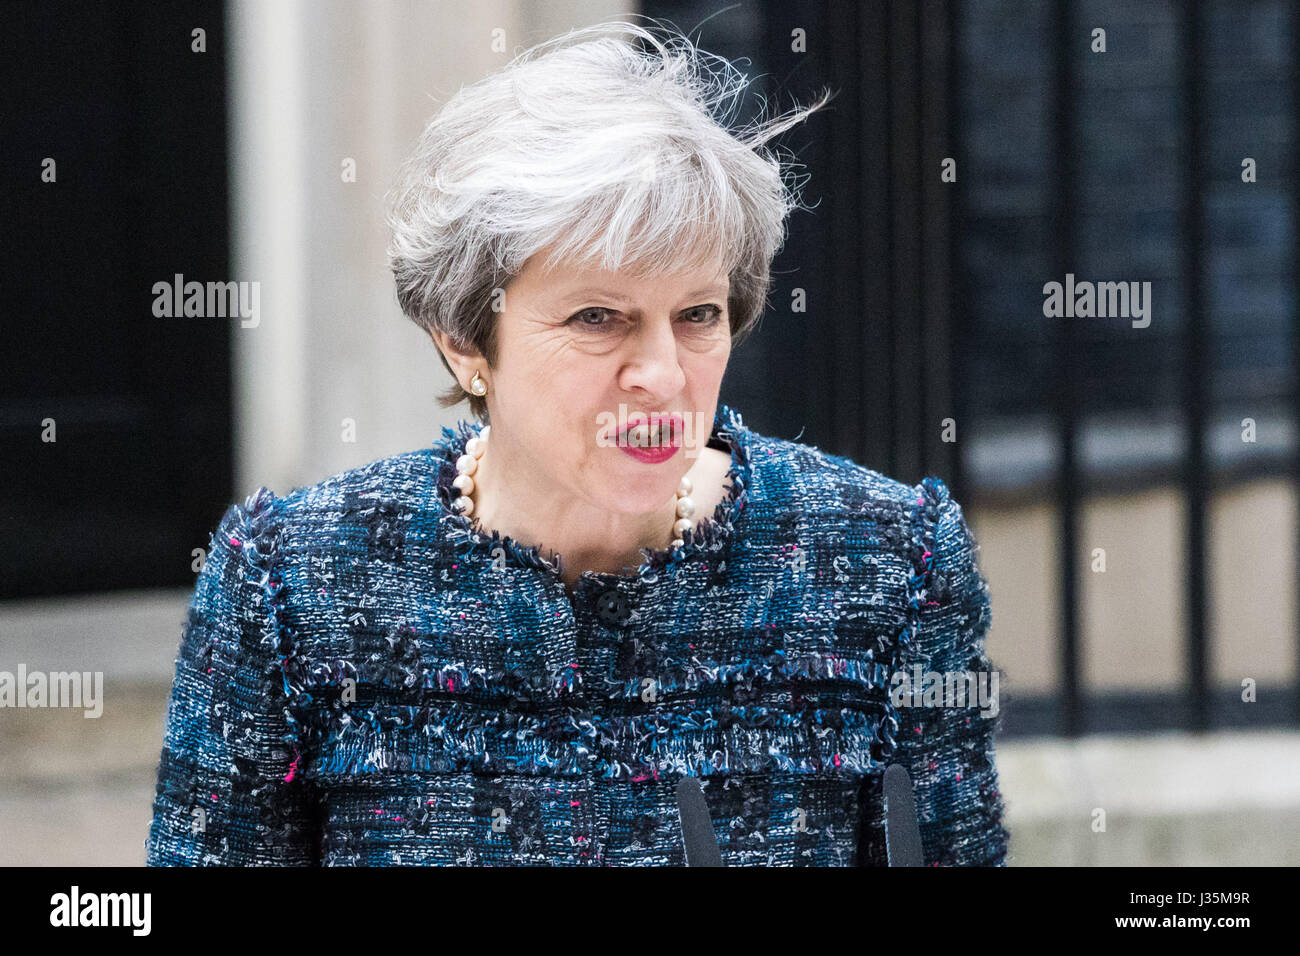 Downing Street, London, May 3rd 2017. British Prime Minister Theresa May addresses the press outside 10 Downing Street following her visit to Buckingham Palace to seek the Queen's permission to dissolve Parliament ahead of the general election to be held on June 8th 2017. Credit: Paul Davey/Alamy Live News Stock Photo